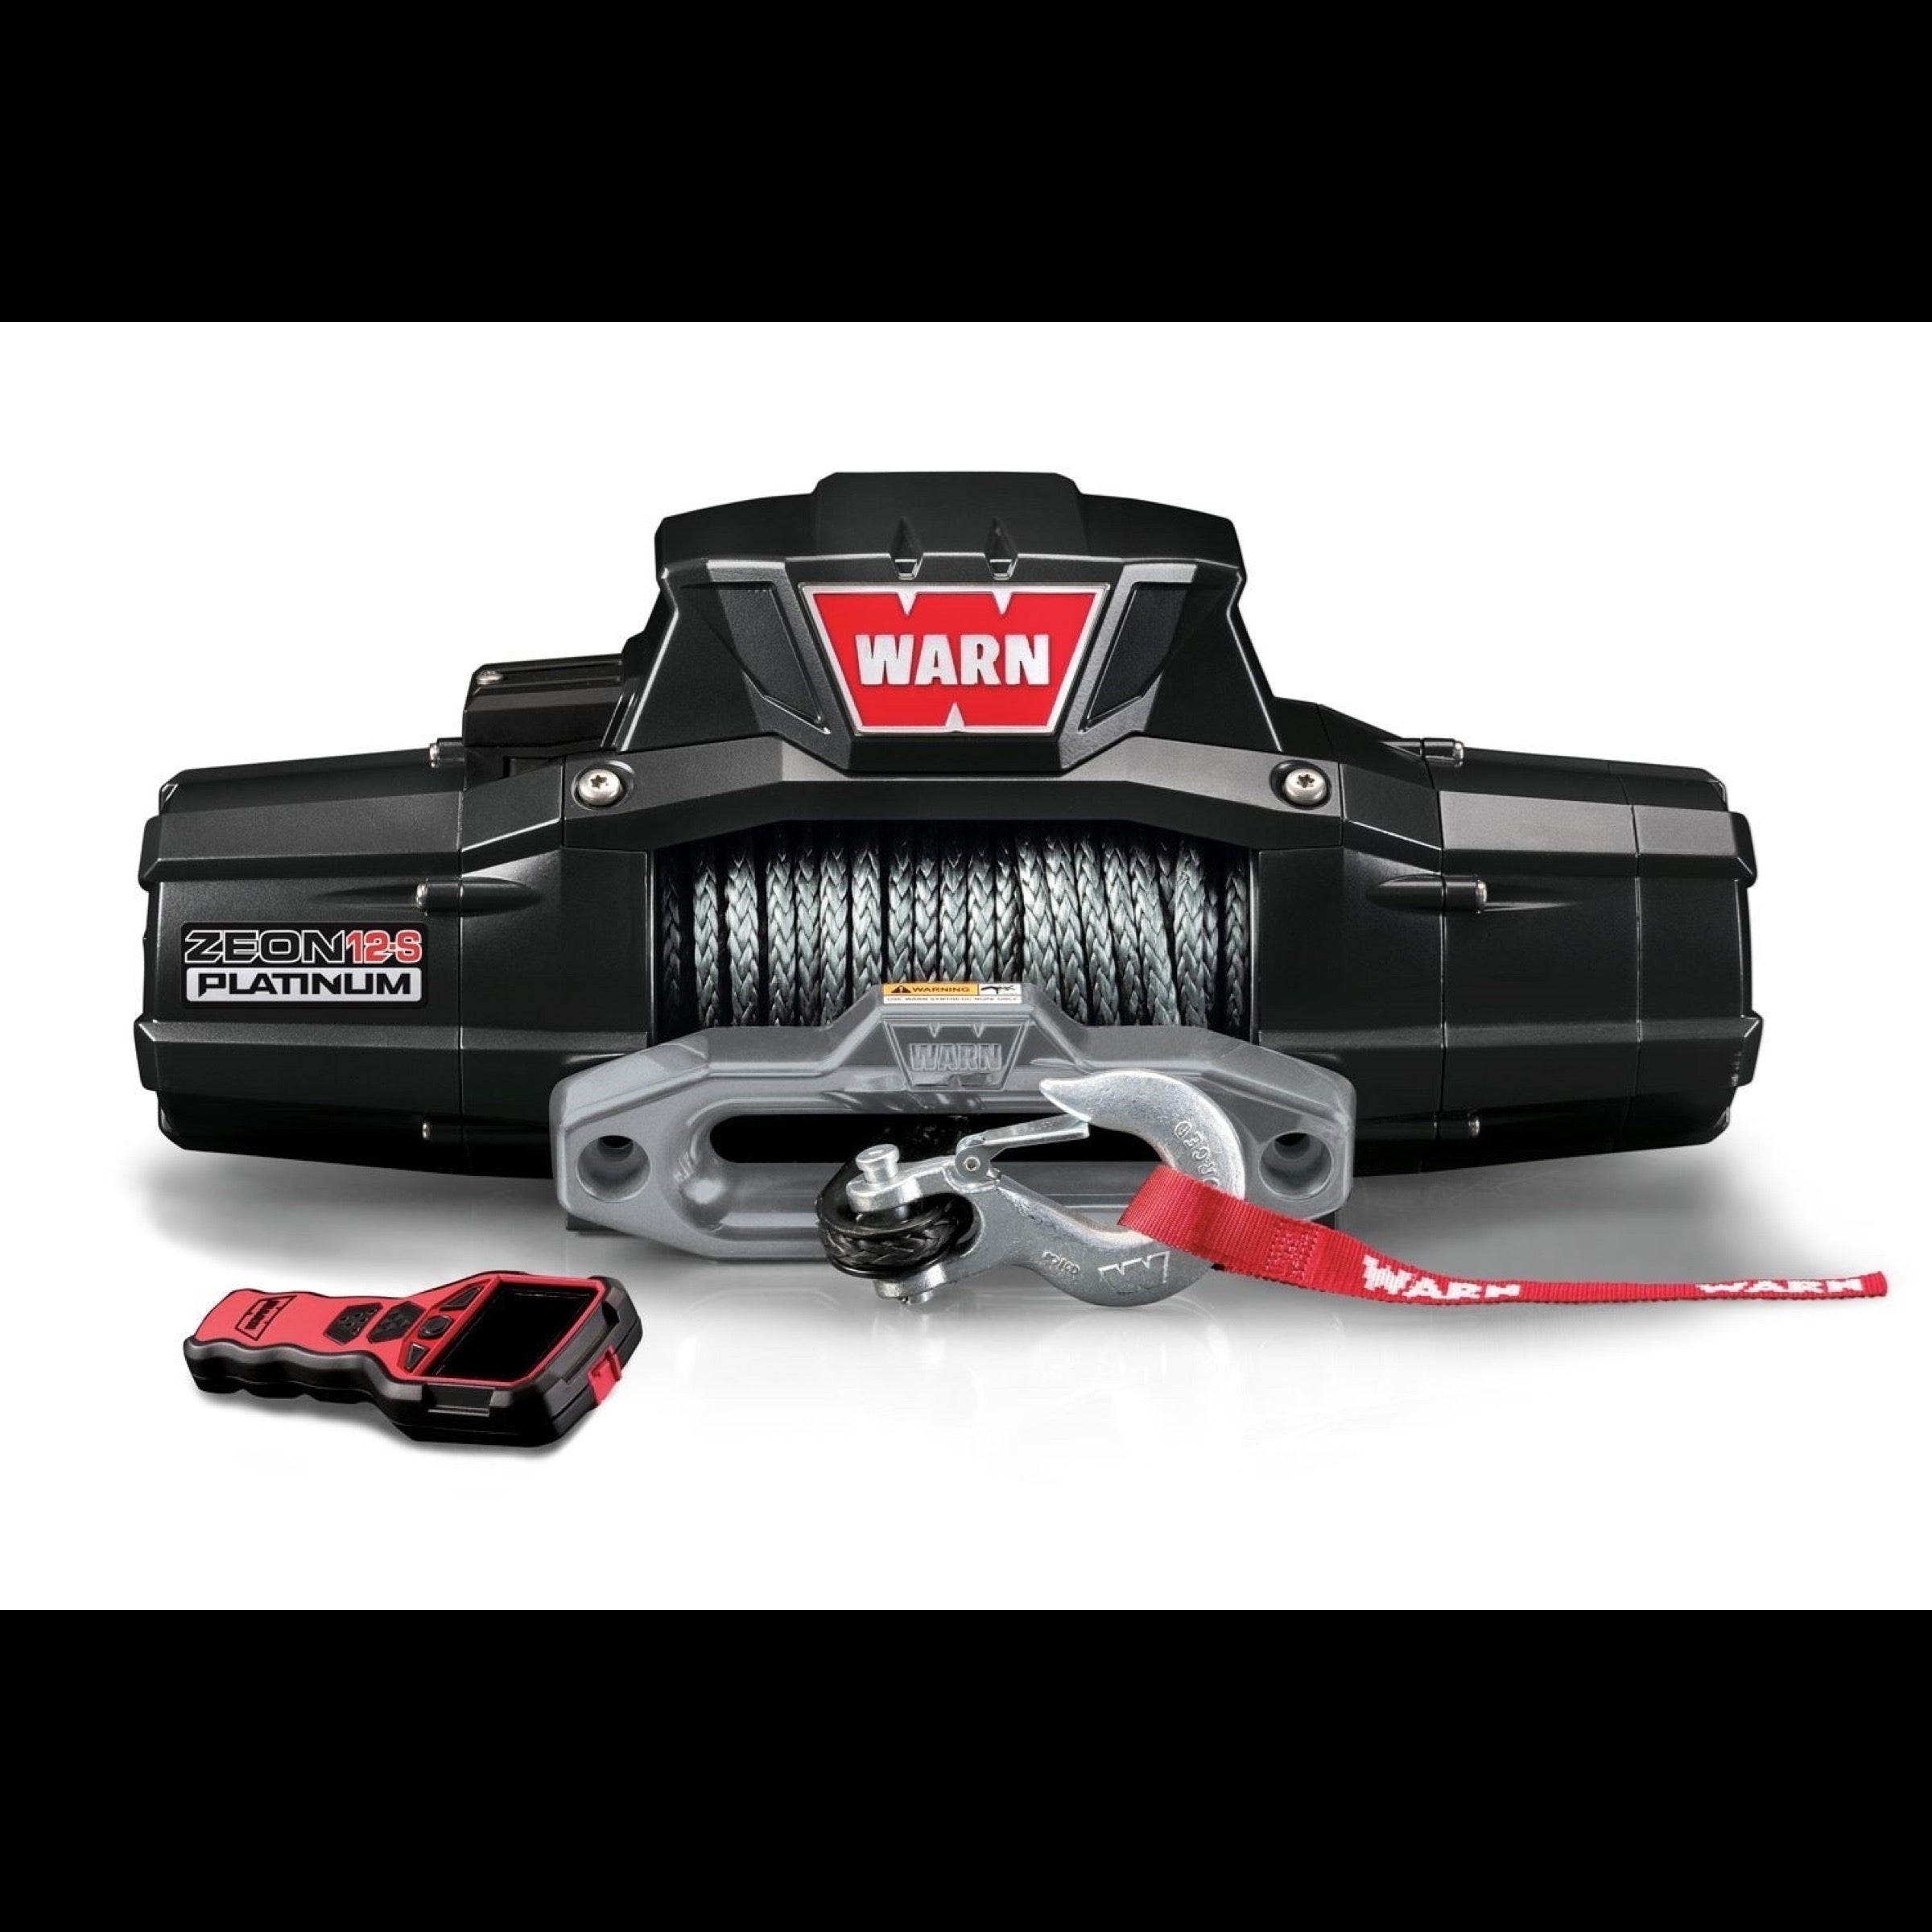 Warn Zeon Winch for offroad and overland recovery